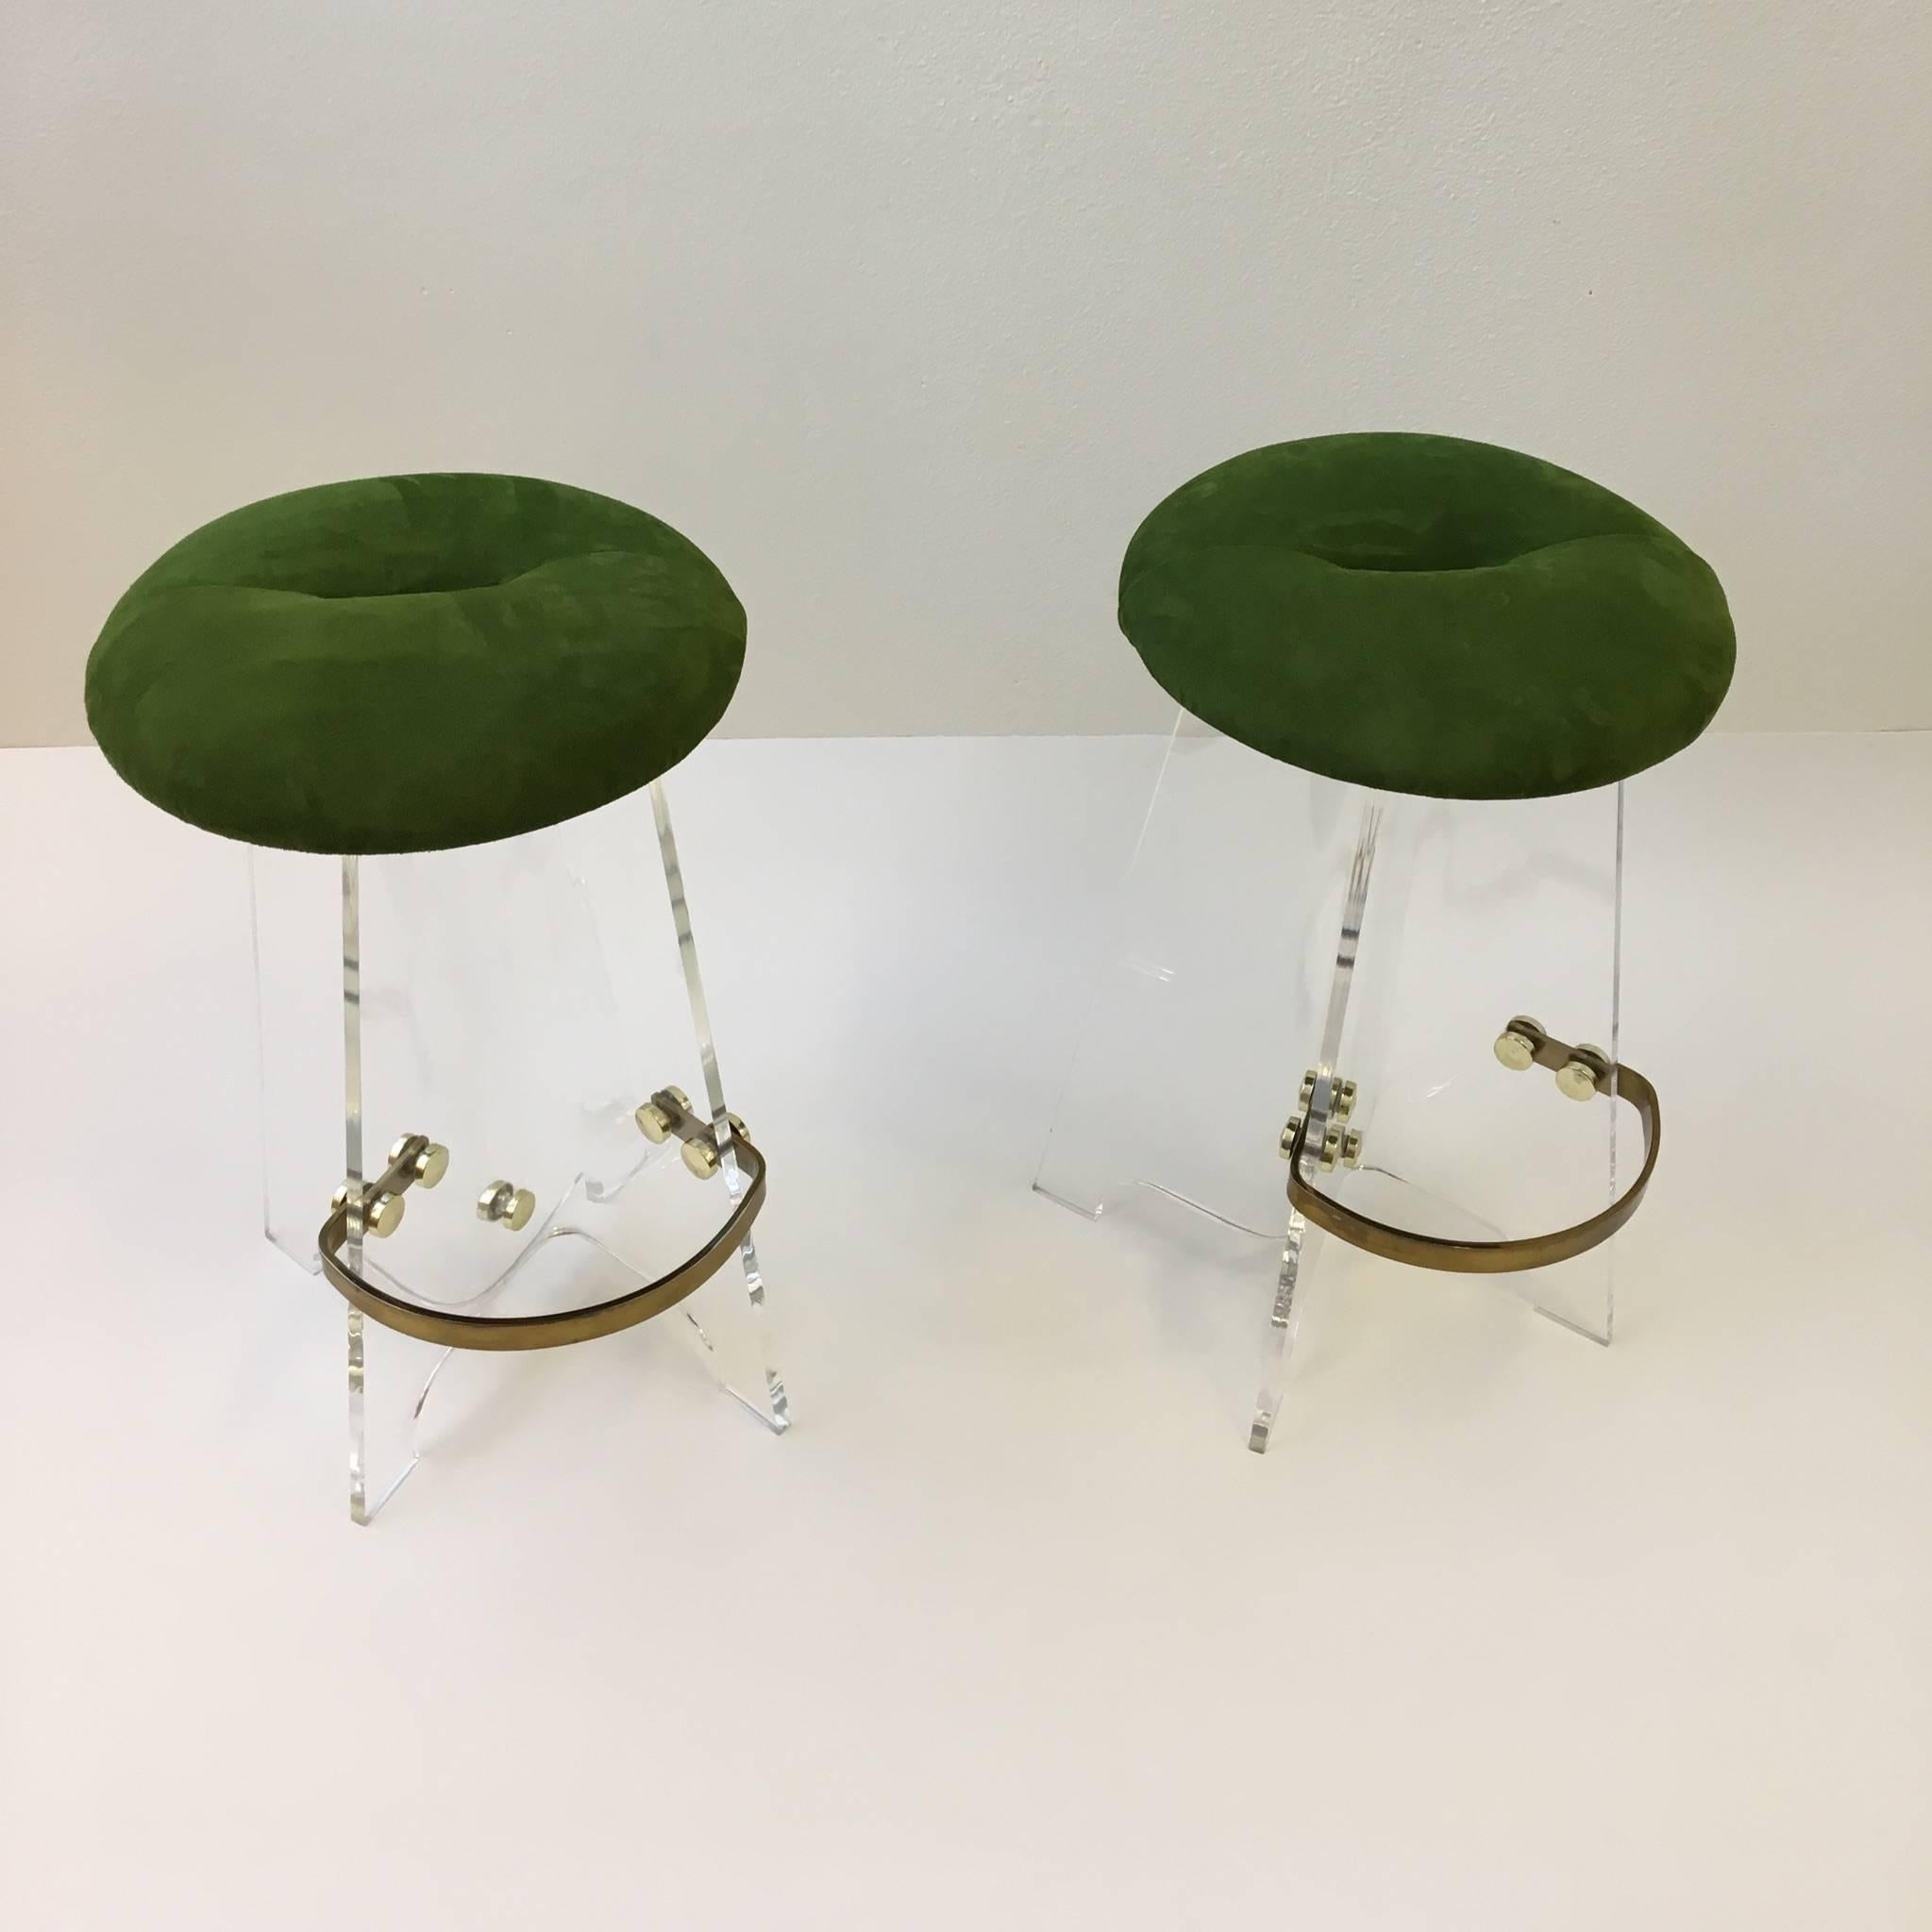 Beautiful pair of Acrylic and suede leather with aged brass footrest. 
Newly reupholstered seats in a olive green suede leather. 
Dimensions: 28.5